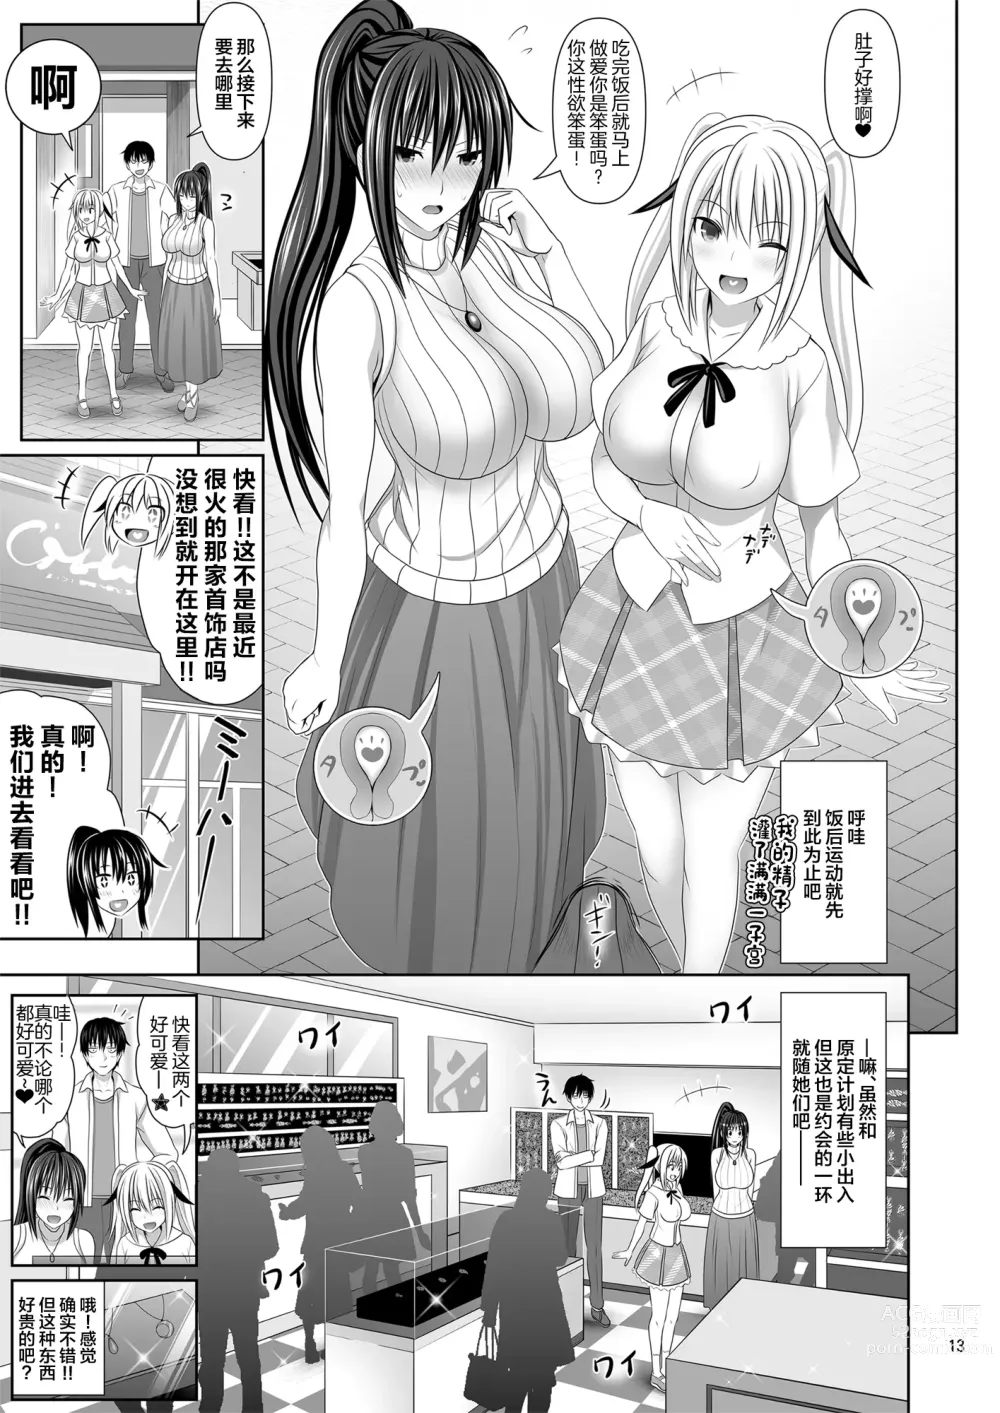 Page 13 of doujinshi SEX FRIEND 6